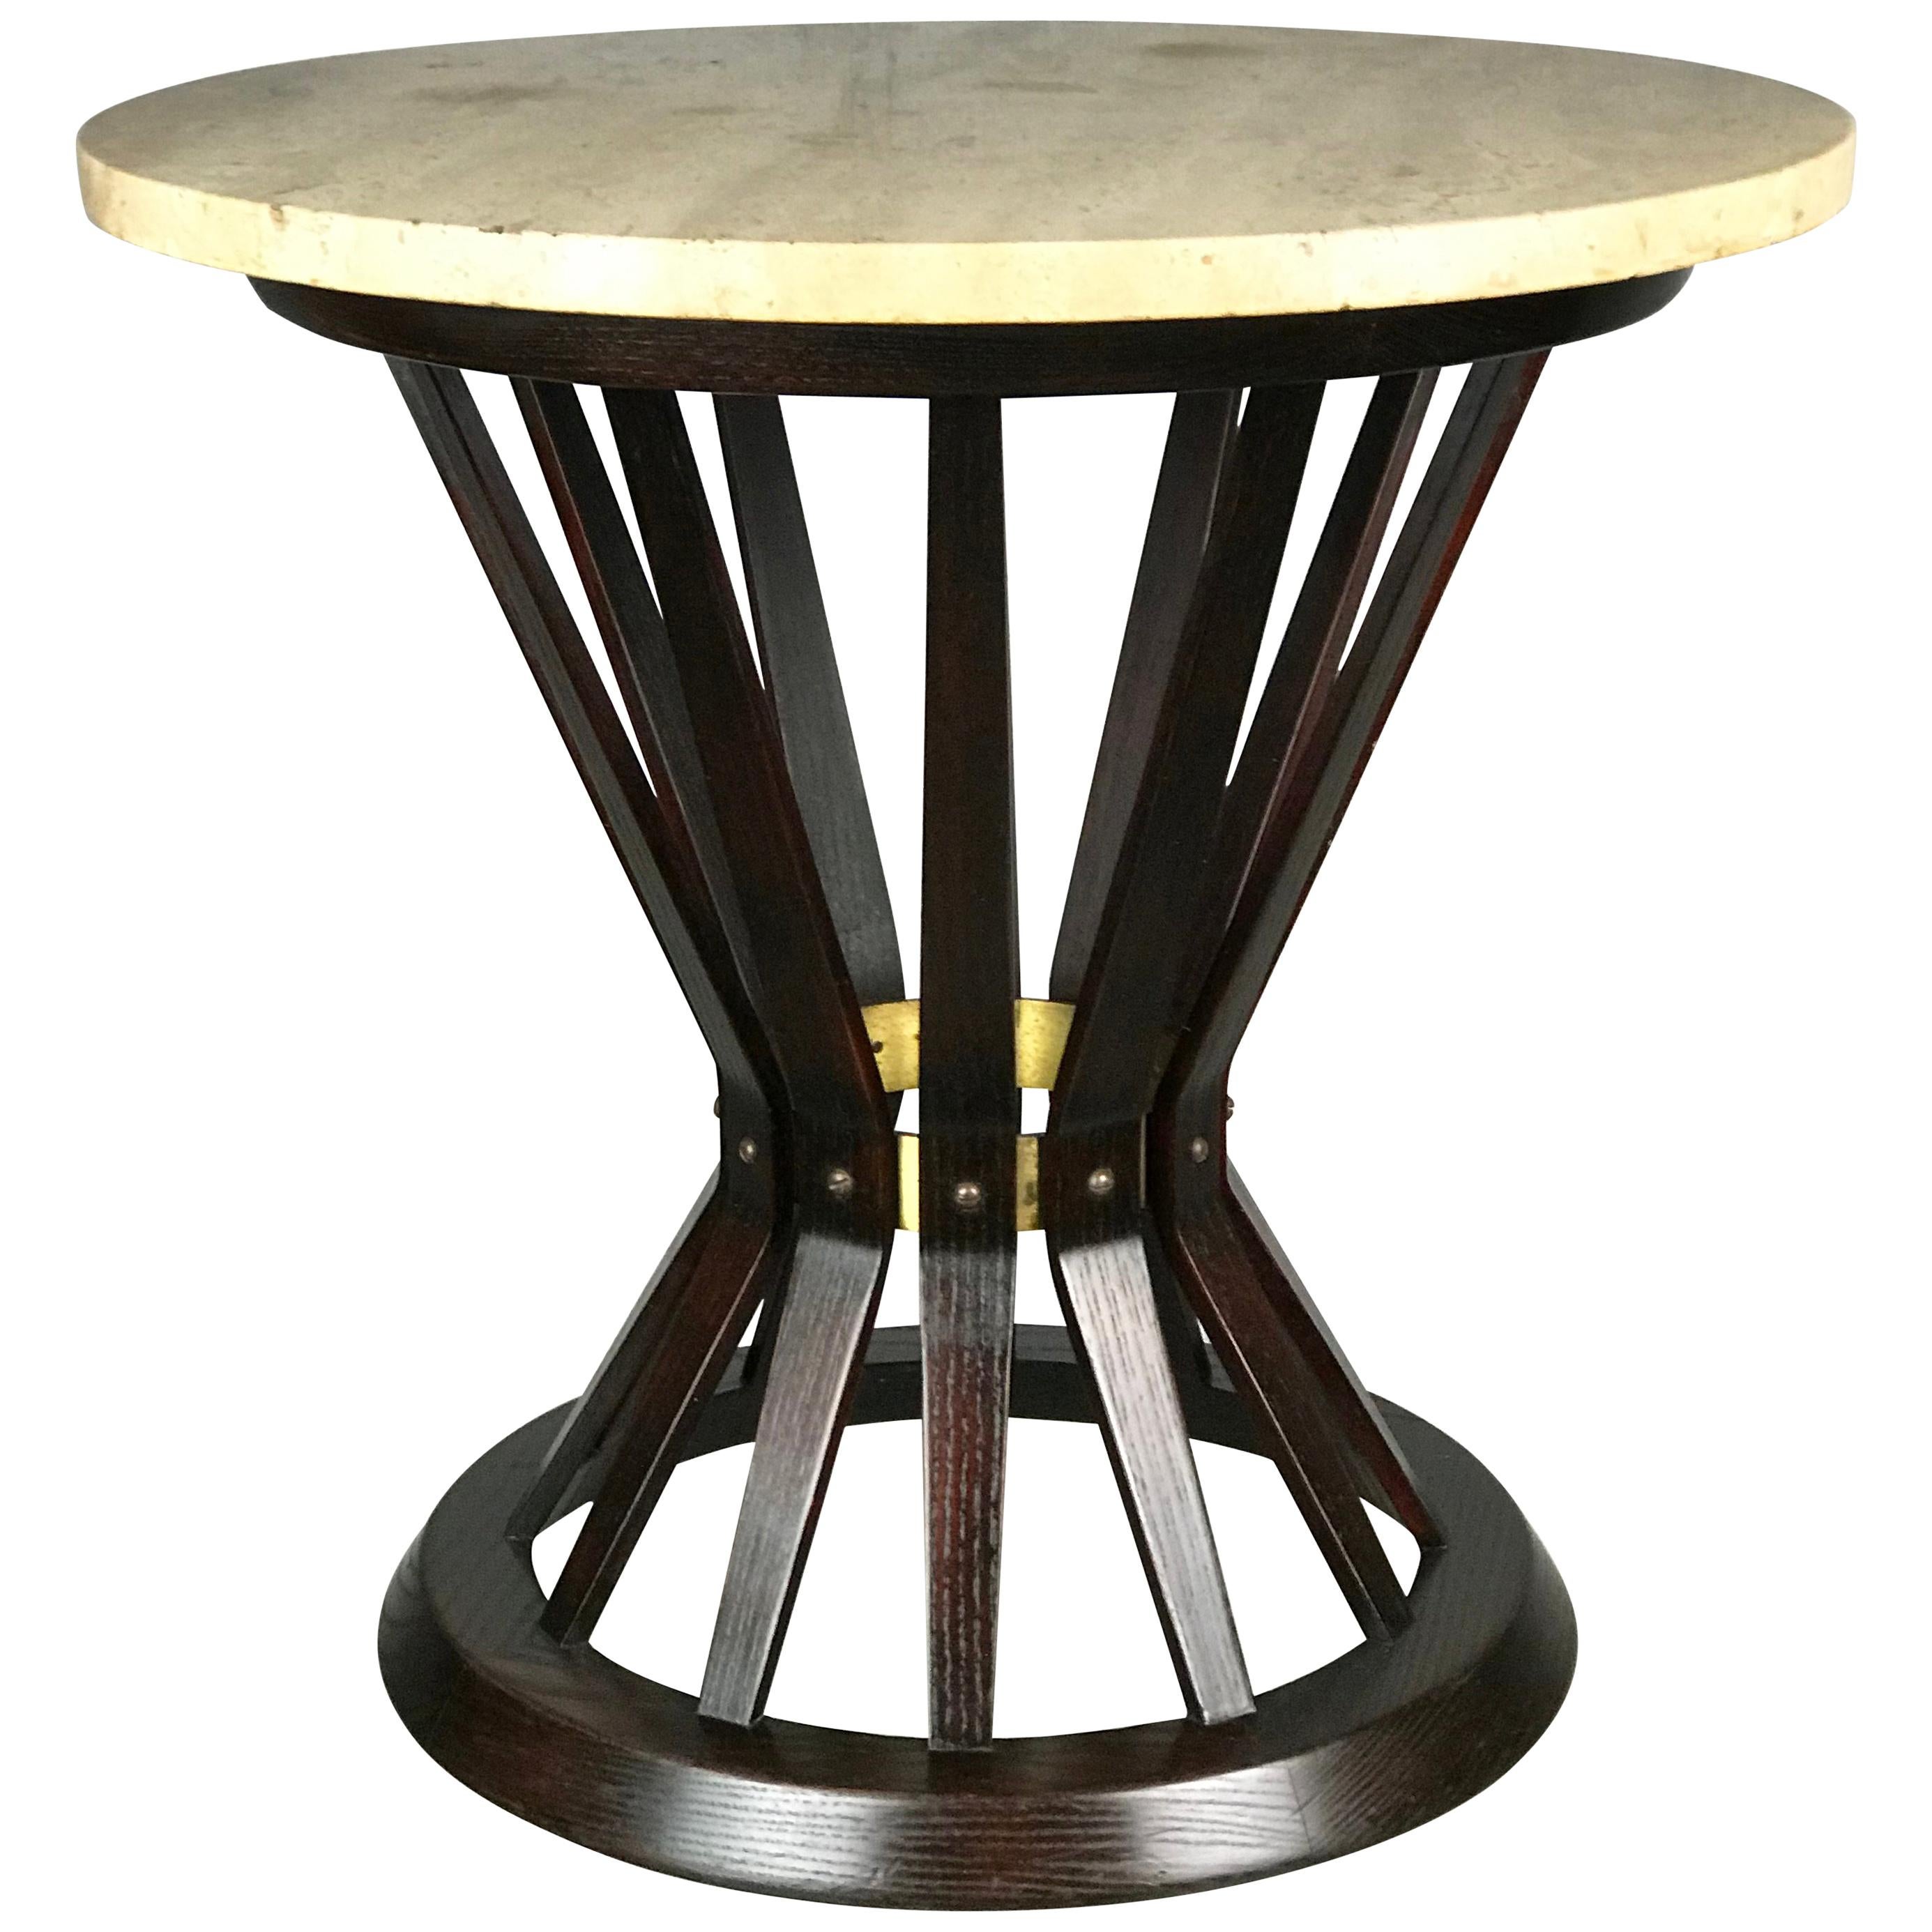 Sheaf of Wheat Side Table by Edward Wormley for Dunbar Travertine Marble Top